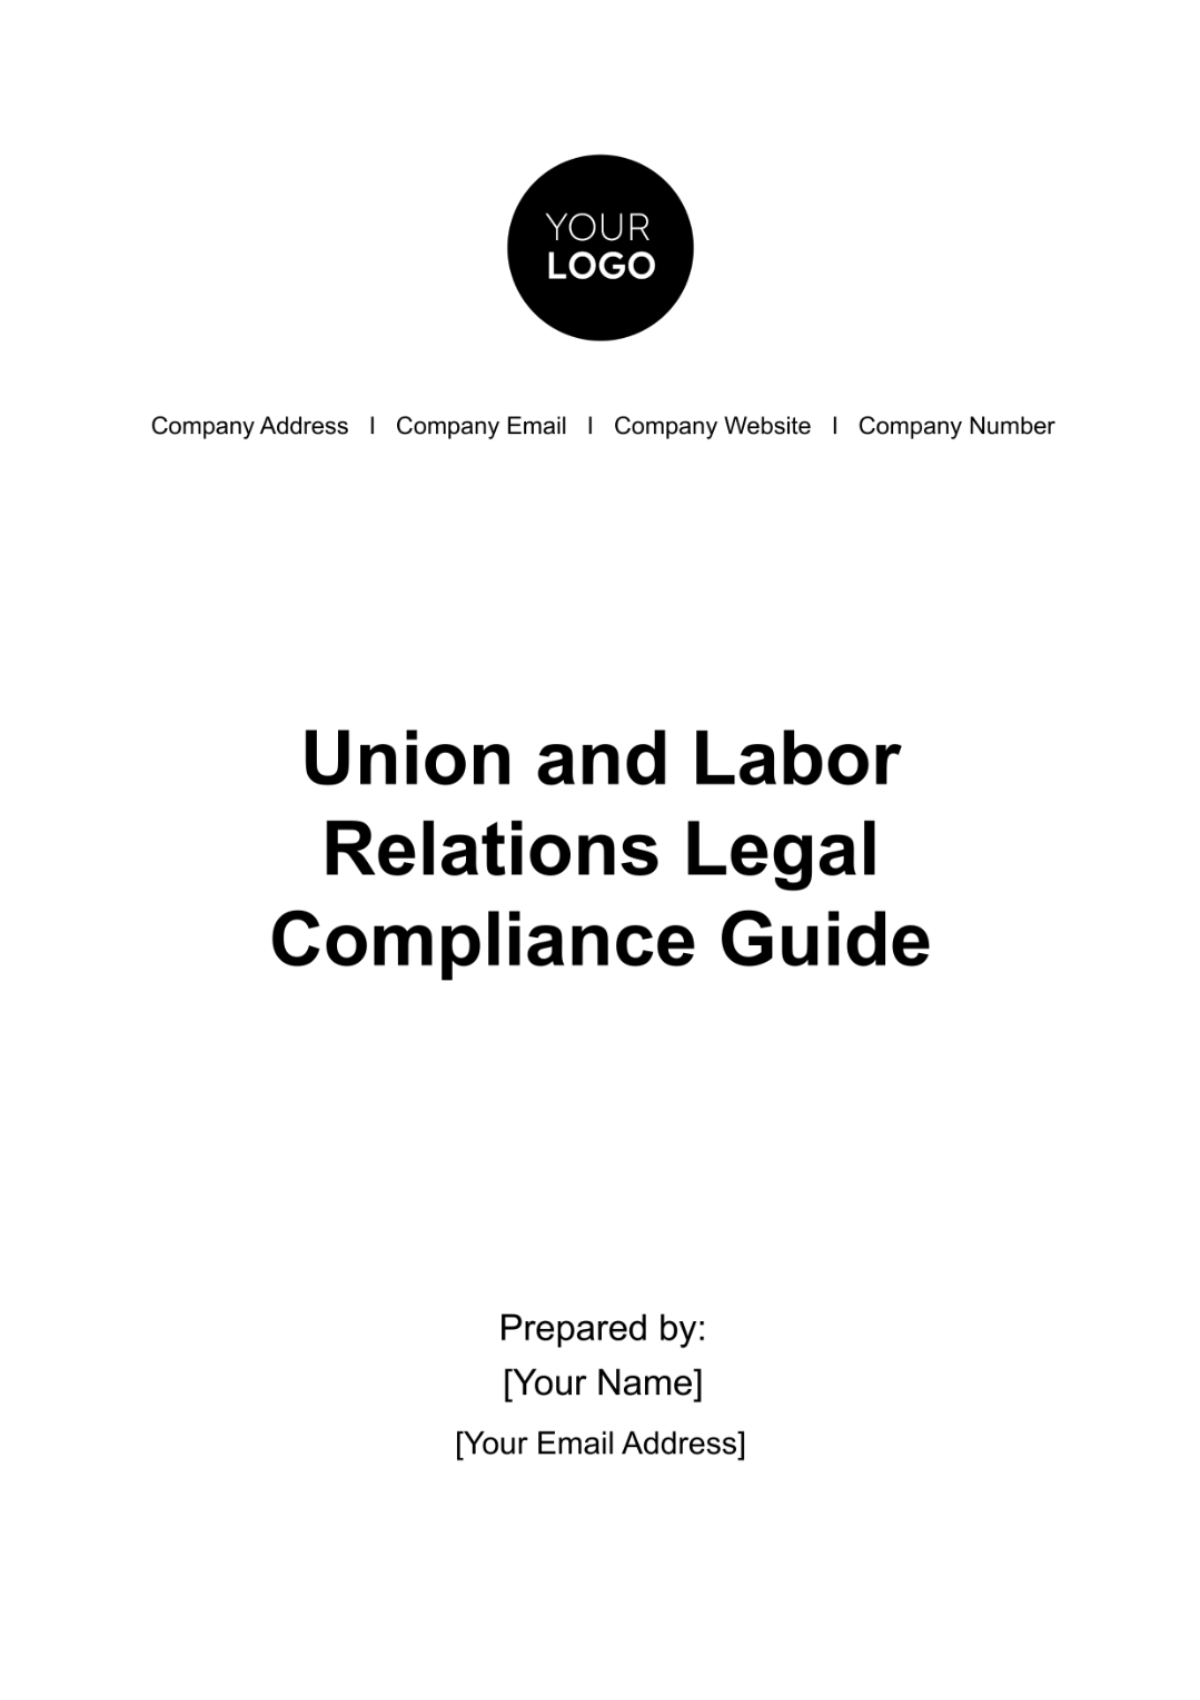 Union and Labor Relations Legal Compliance Guide HR Template